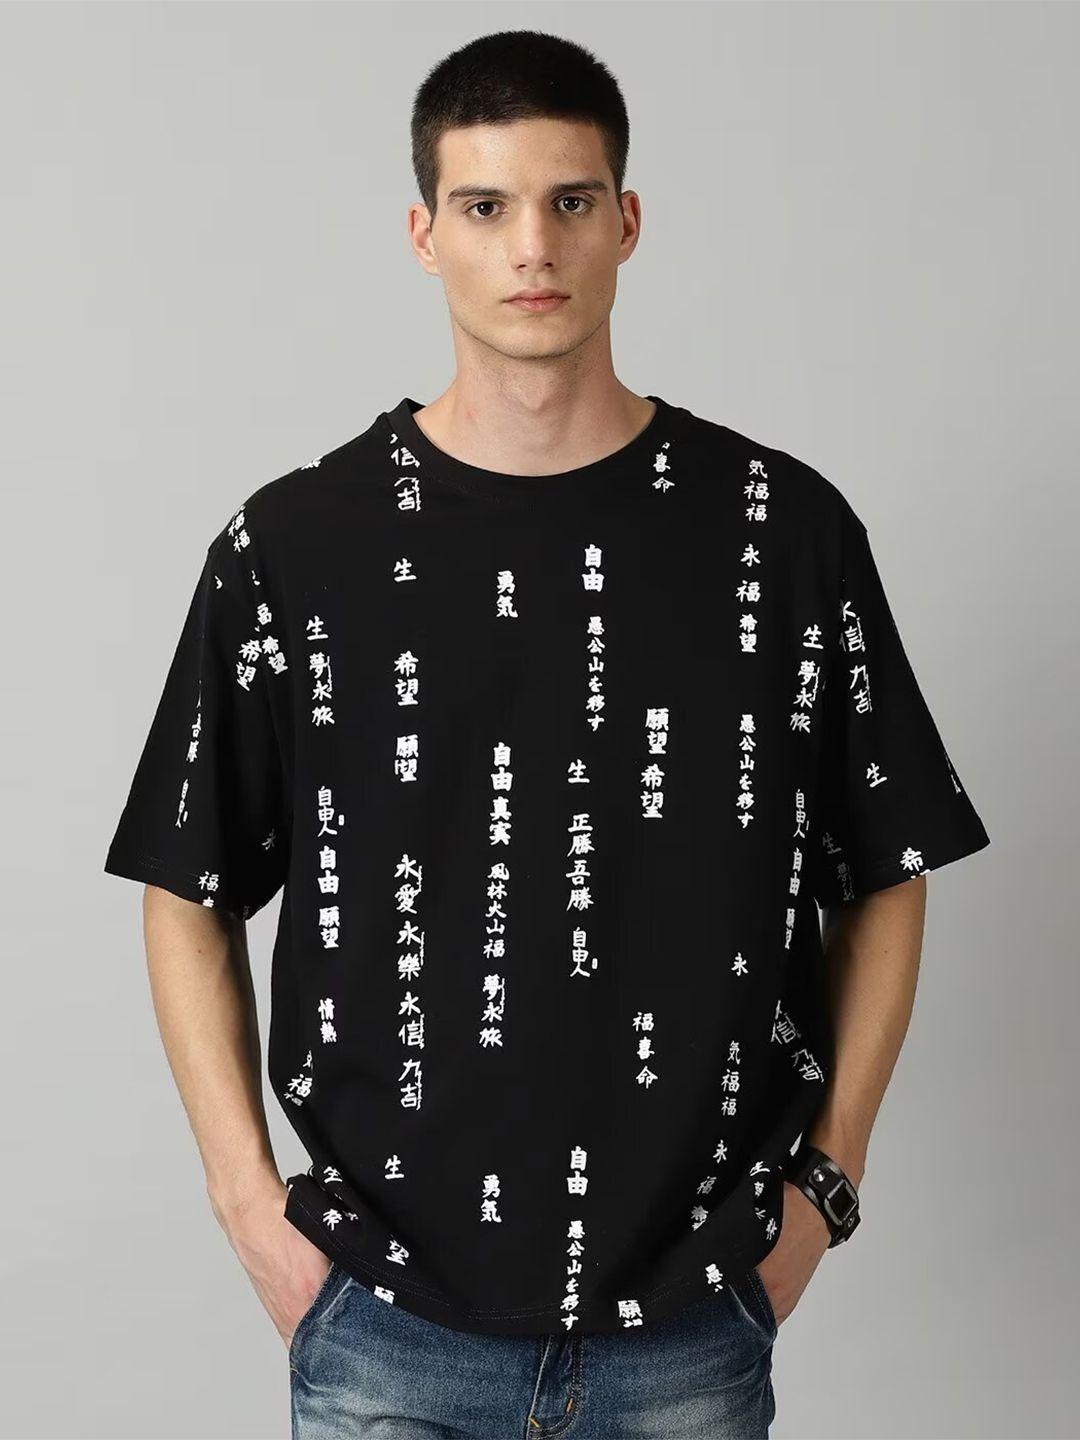 THE HOLLANDER Typography Printed Drop Shoulder Pure Cotton T-Shirt